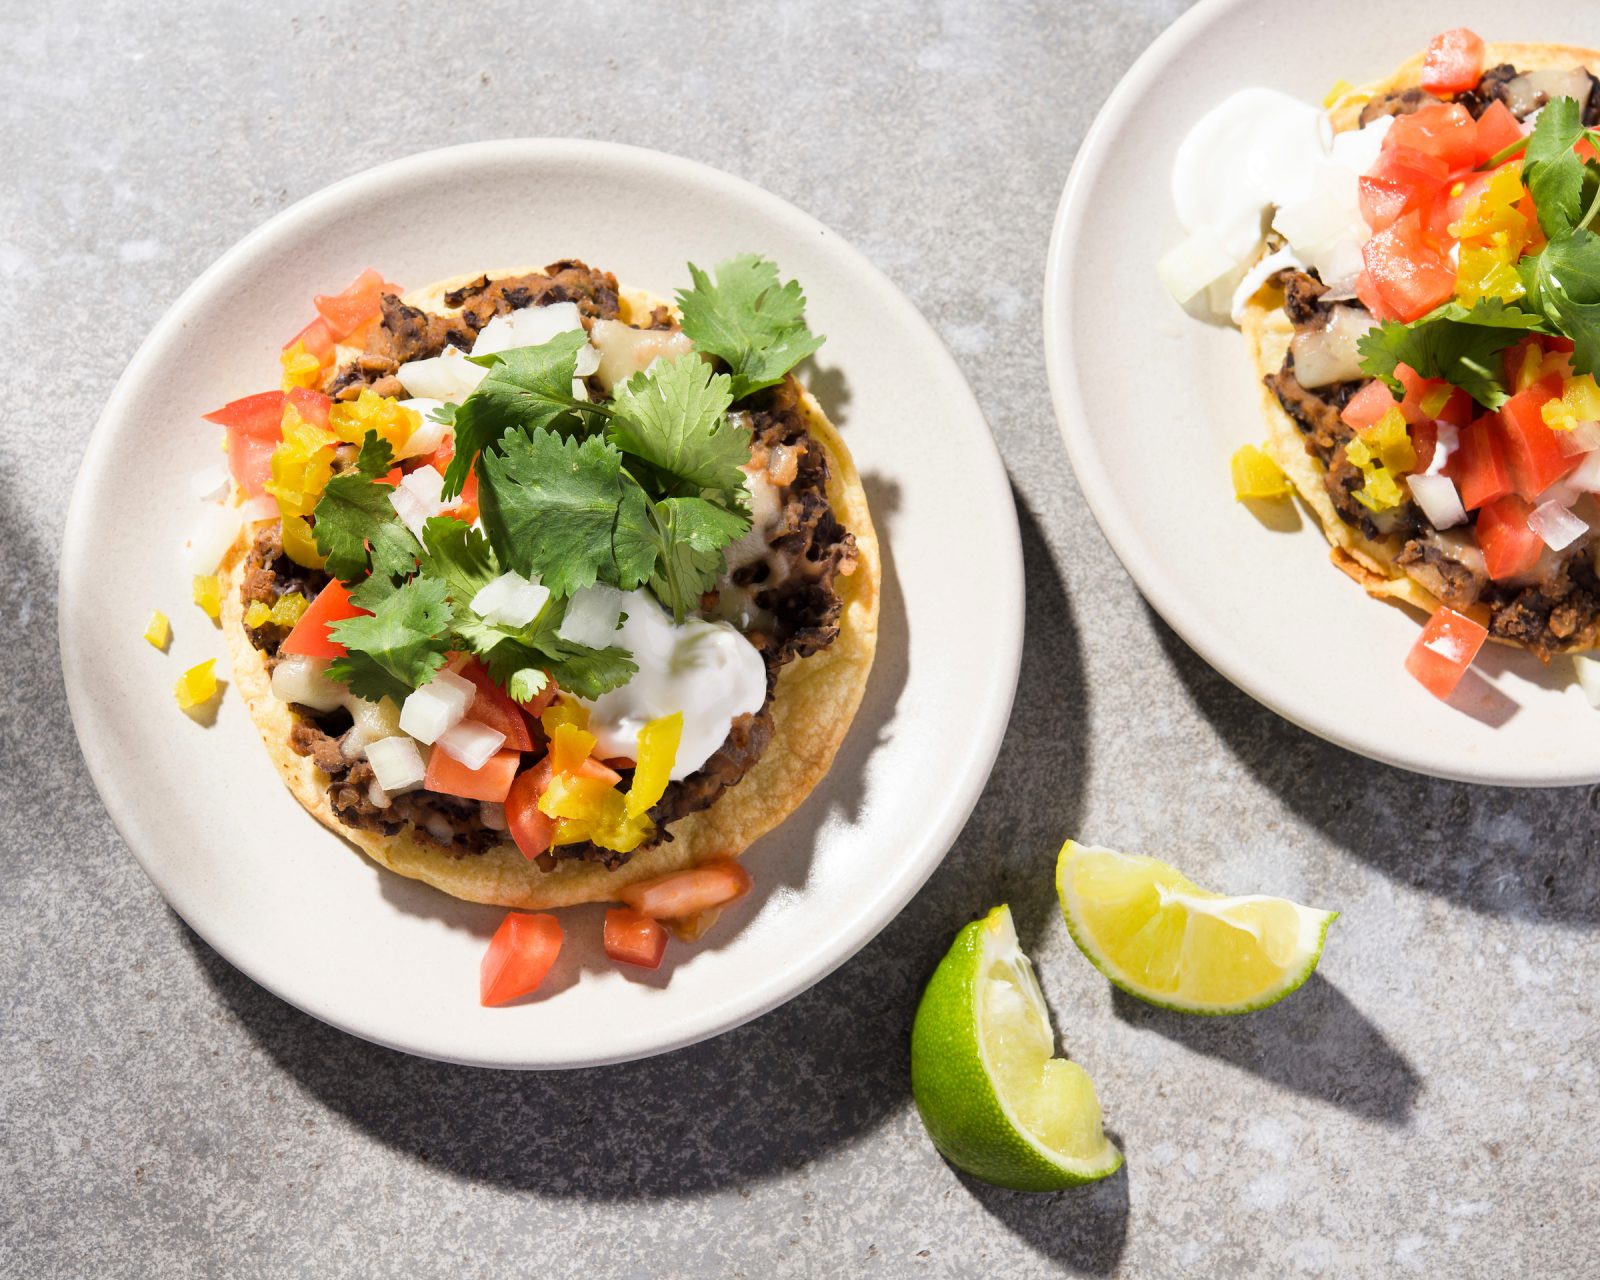 Refried Bean Cheese Tostadas Cook What You Have Milk Street